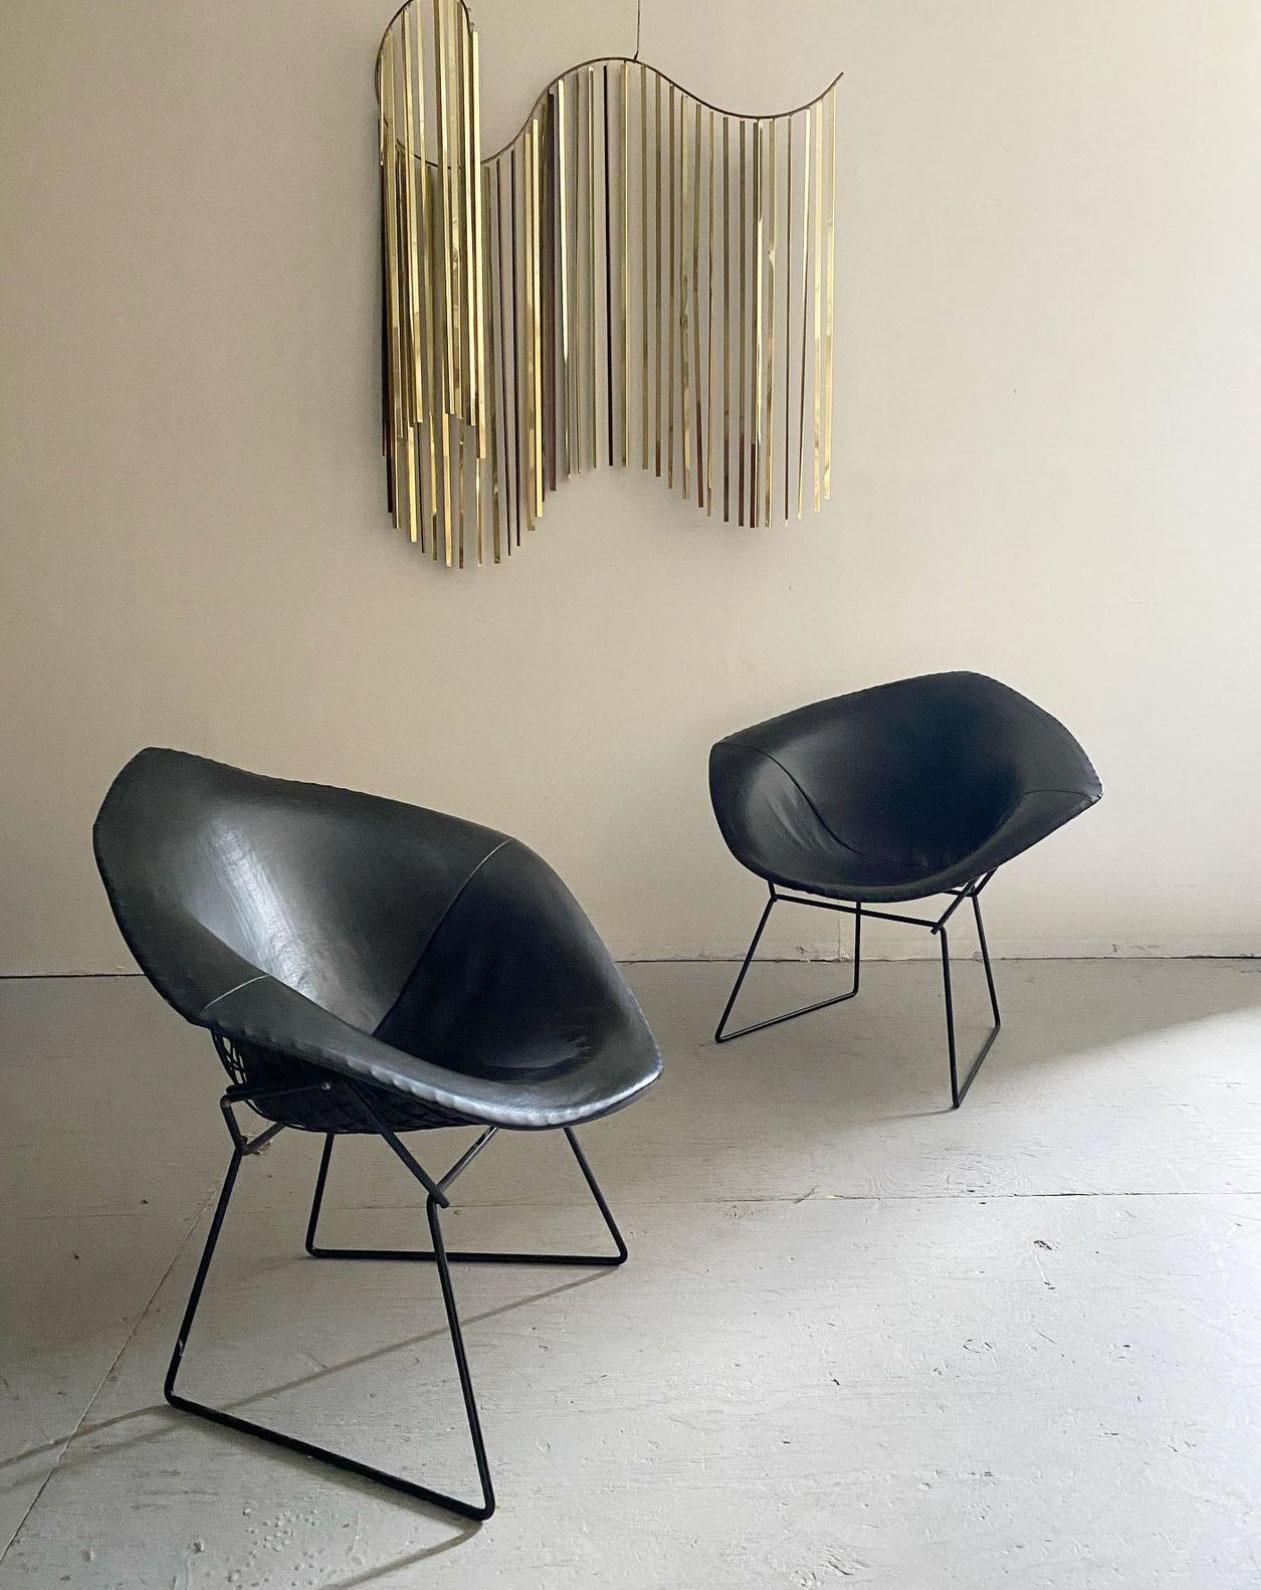 Mid-Century Modern “Diamond” Chairs Designed By Harry Bertoia For Knoll, circa 1960s. This early pair of Diamond chairs feature original fully upholstered black leather covers. Both chairs have two early manufacturer labels on the underside with